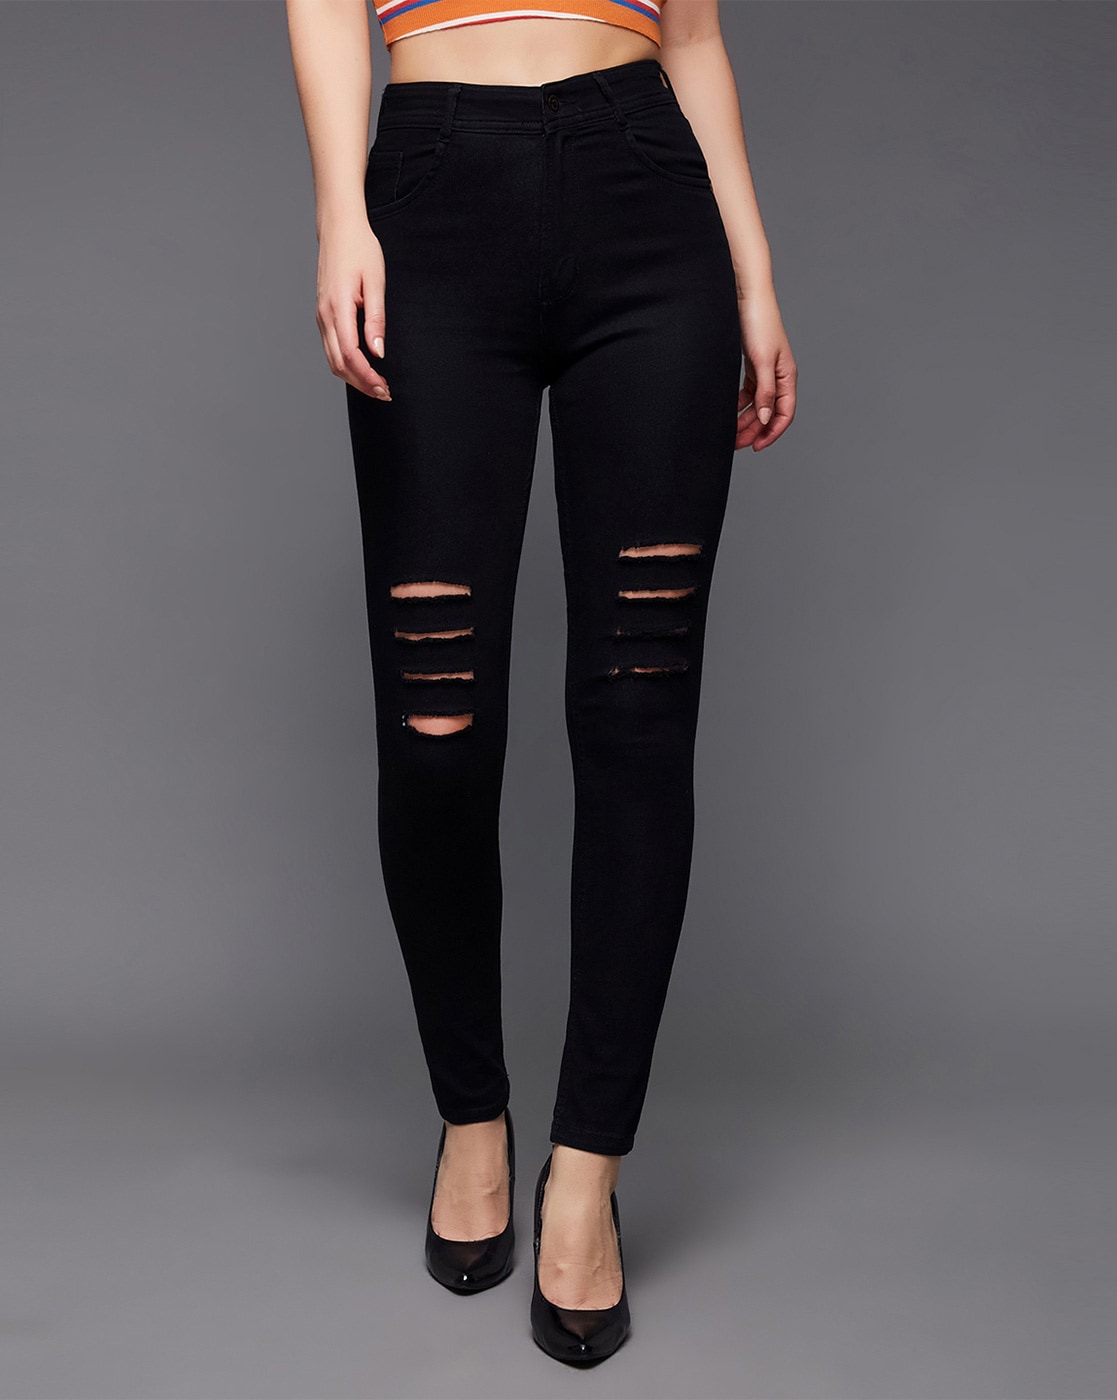 Buy Black Jeans & Jeggings for Women by MISS CHASE Online